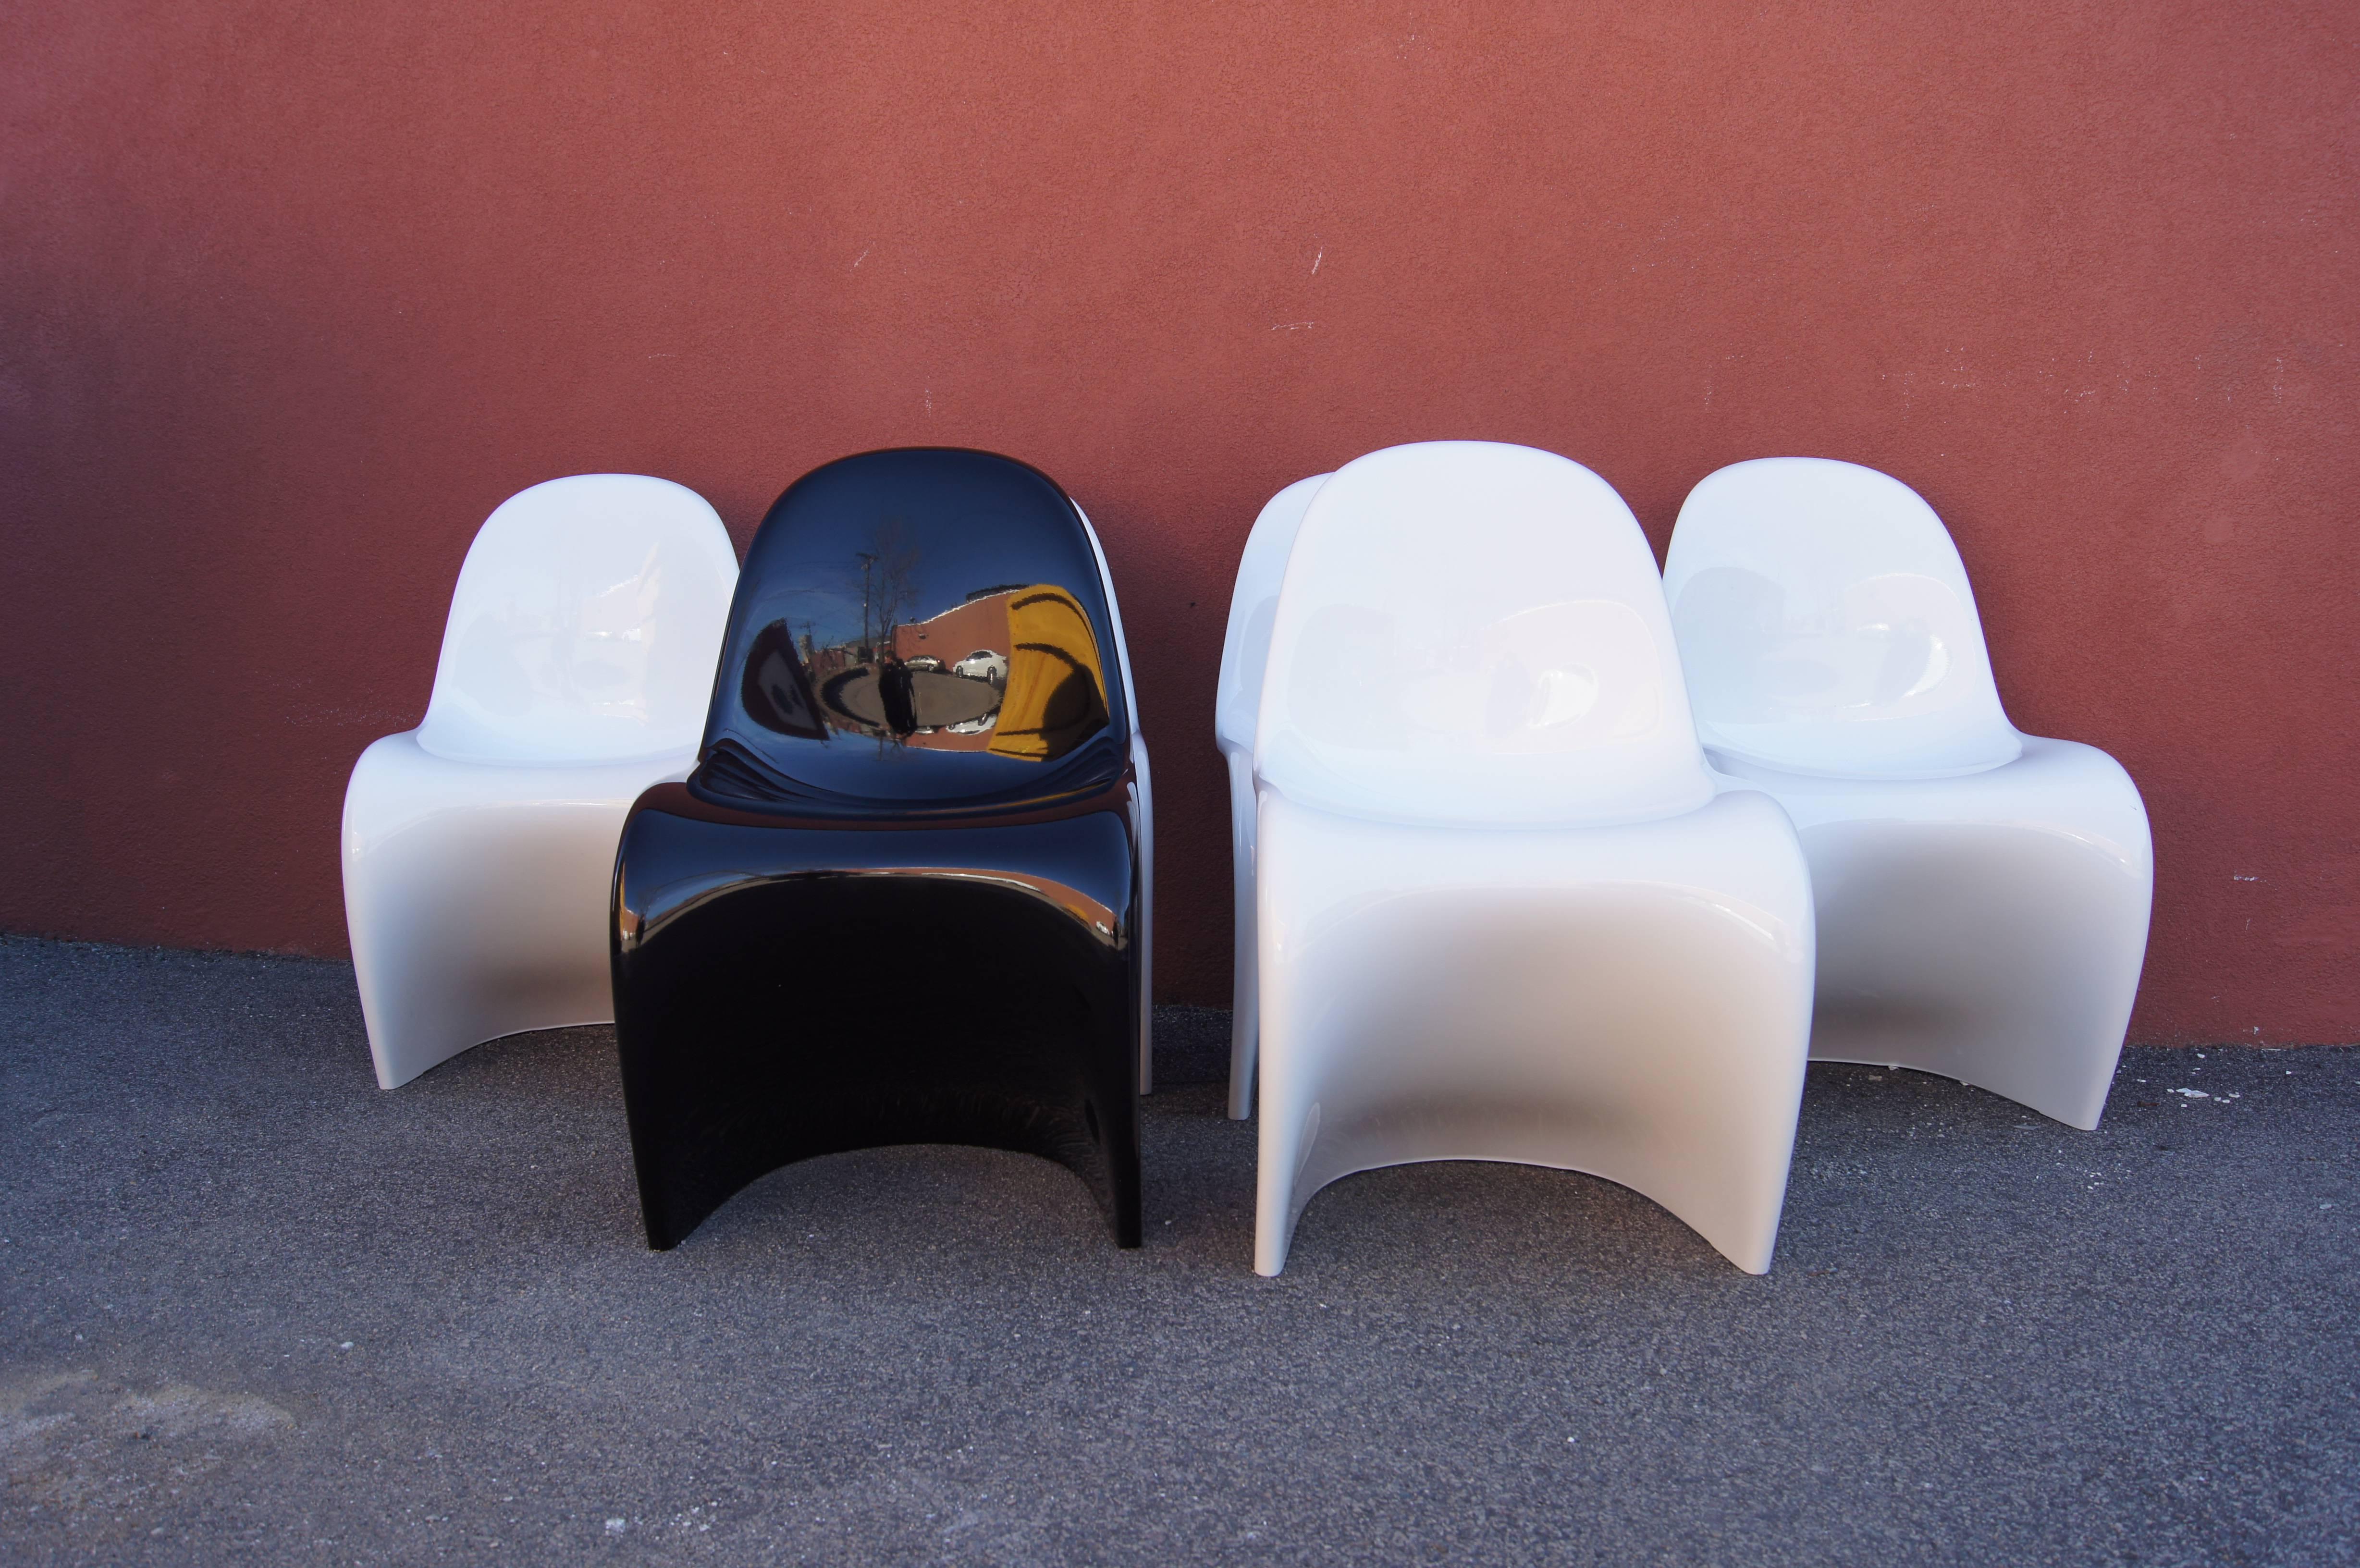 Captivated by the potential of plastic, Danish designer Verner Panton created the first single-form injection-molded chair, which was originally manufactured by Vitra for Herman Miller in 1967. Cantilevered into a sinuous S, the chair is easily